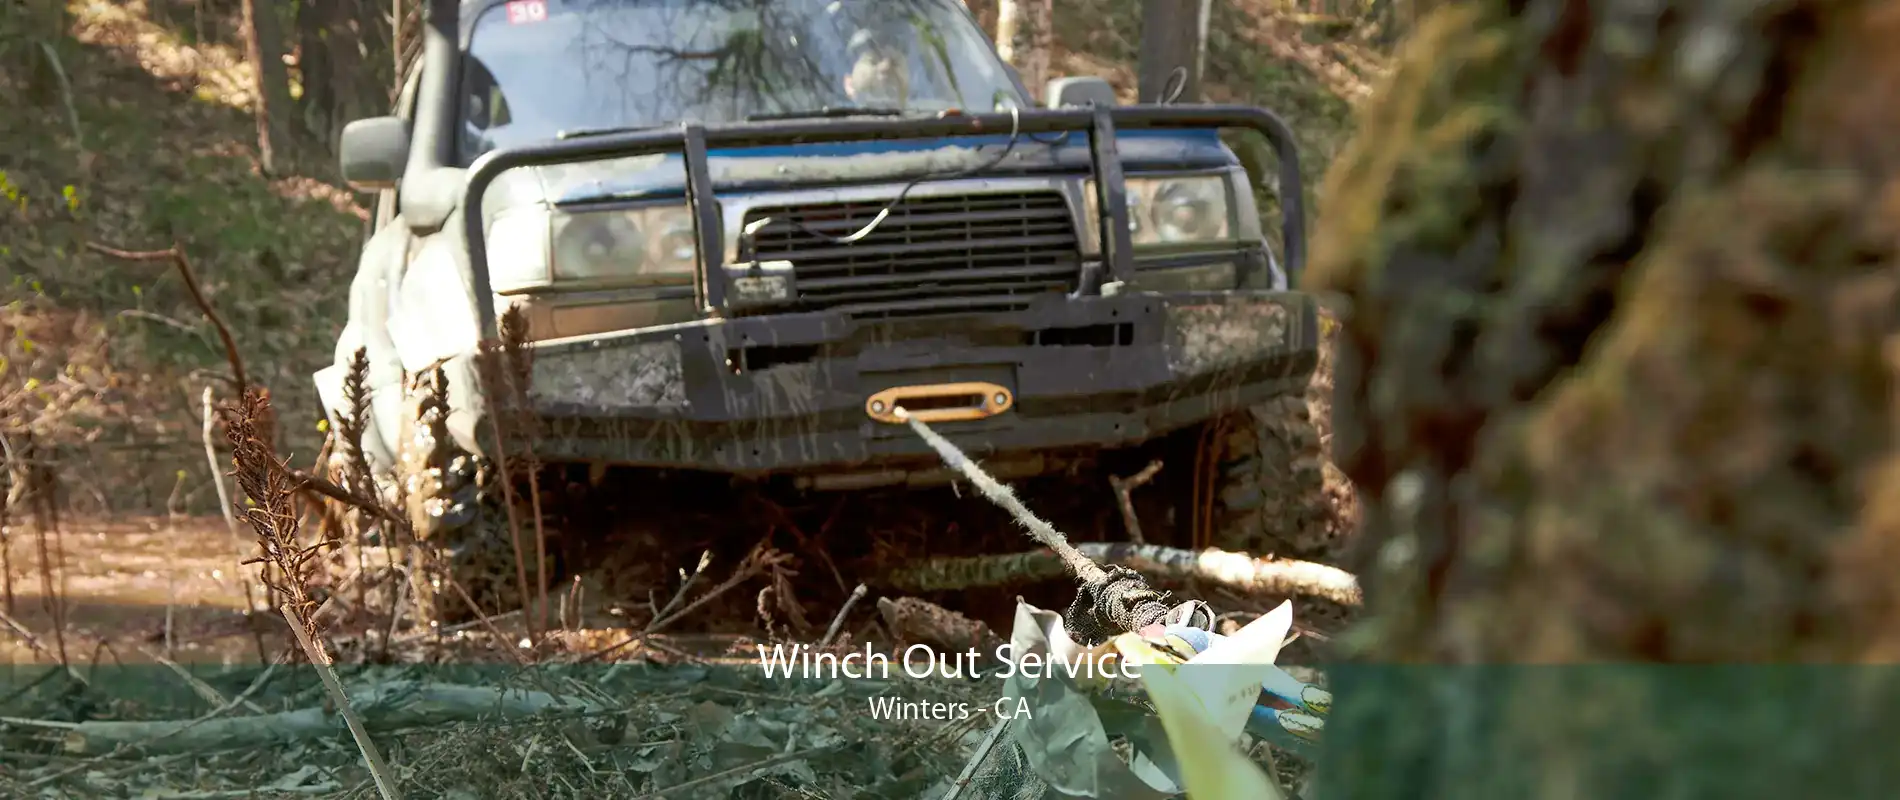 Winch Out Service Winters - CA